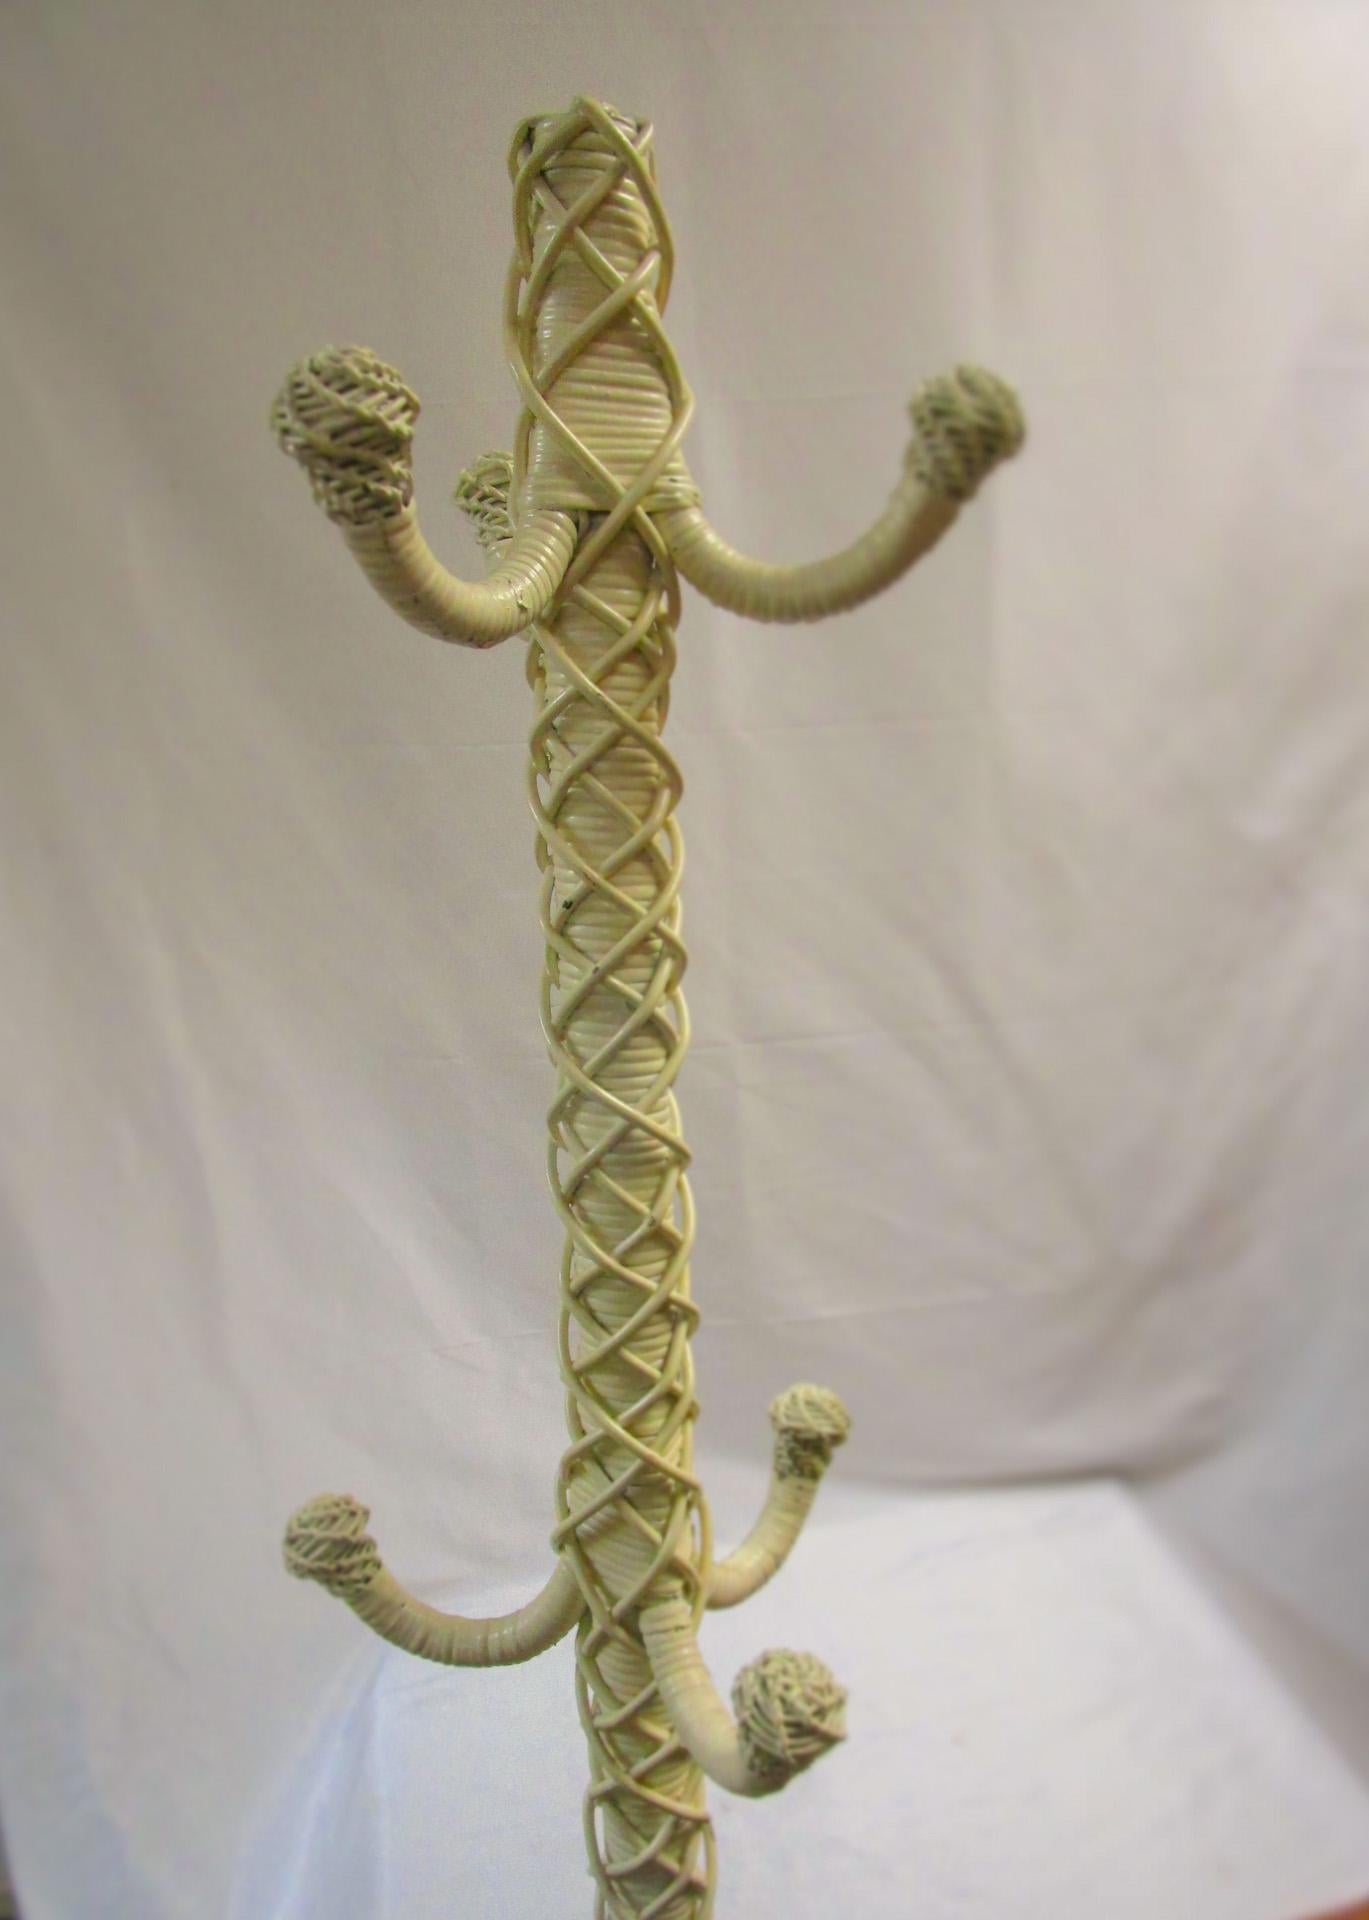 This rare 19th century wicker hat/coat stand features a very unusual loosely woven braid over a central flat reed wrapped wooden pole. There are six pegs for hanging with intricately woven ends. The three dimensional base is a work of art.
From a